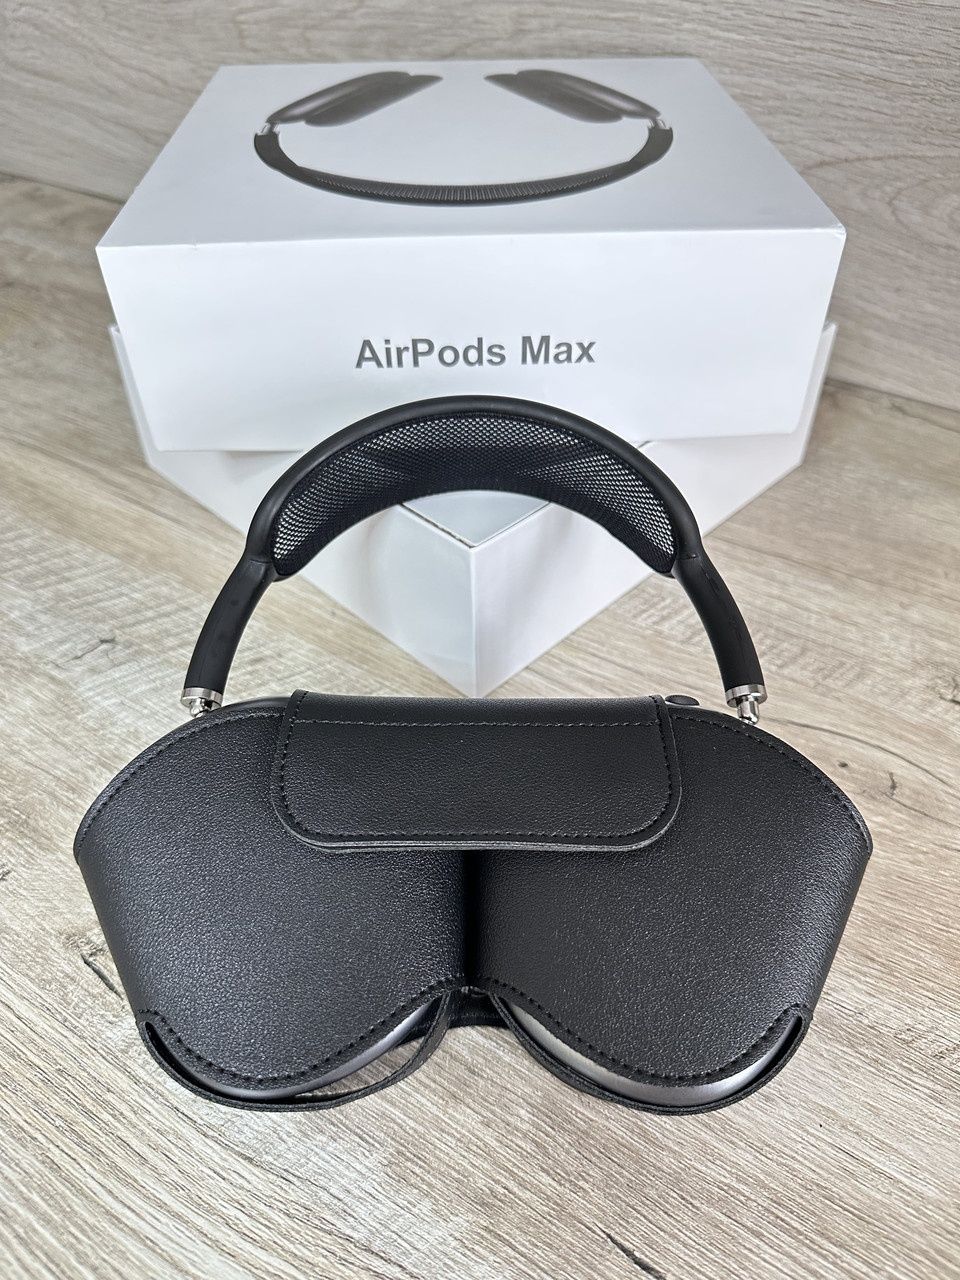 Airpods Pro Max apple